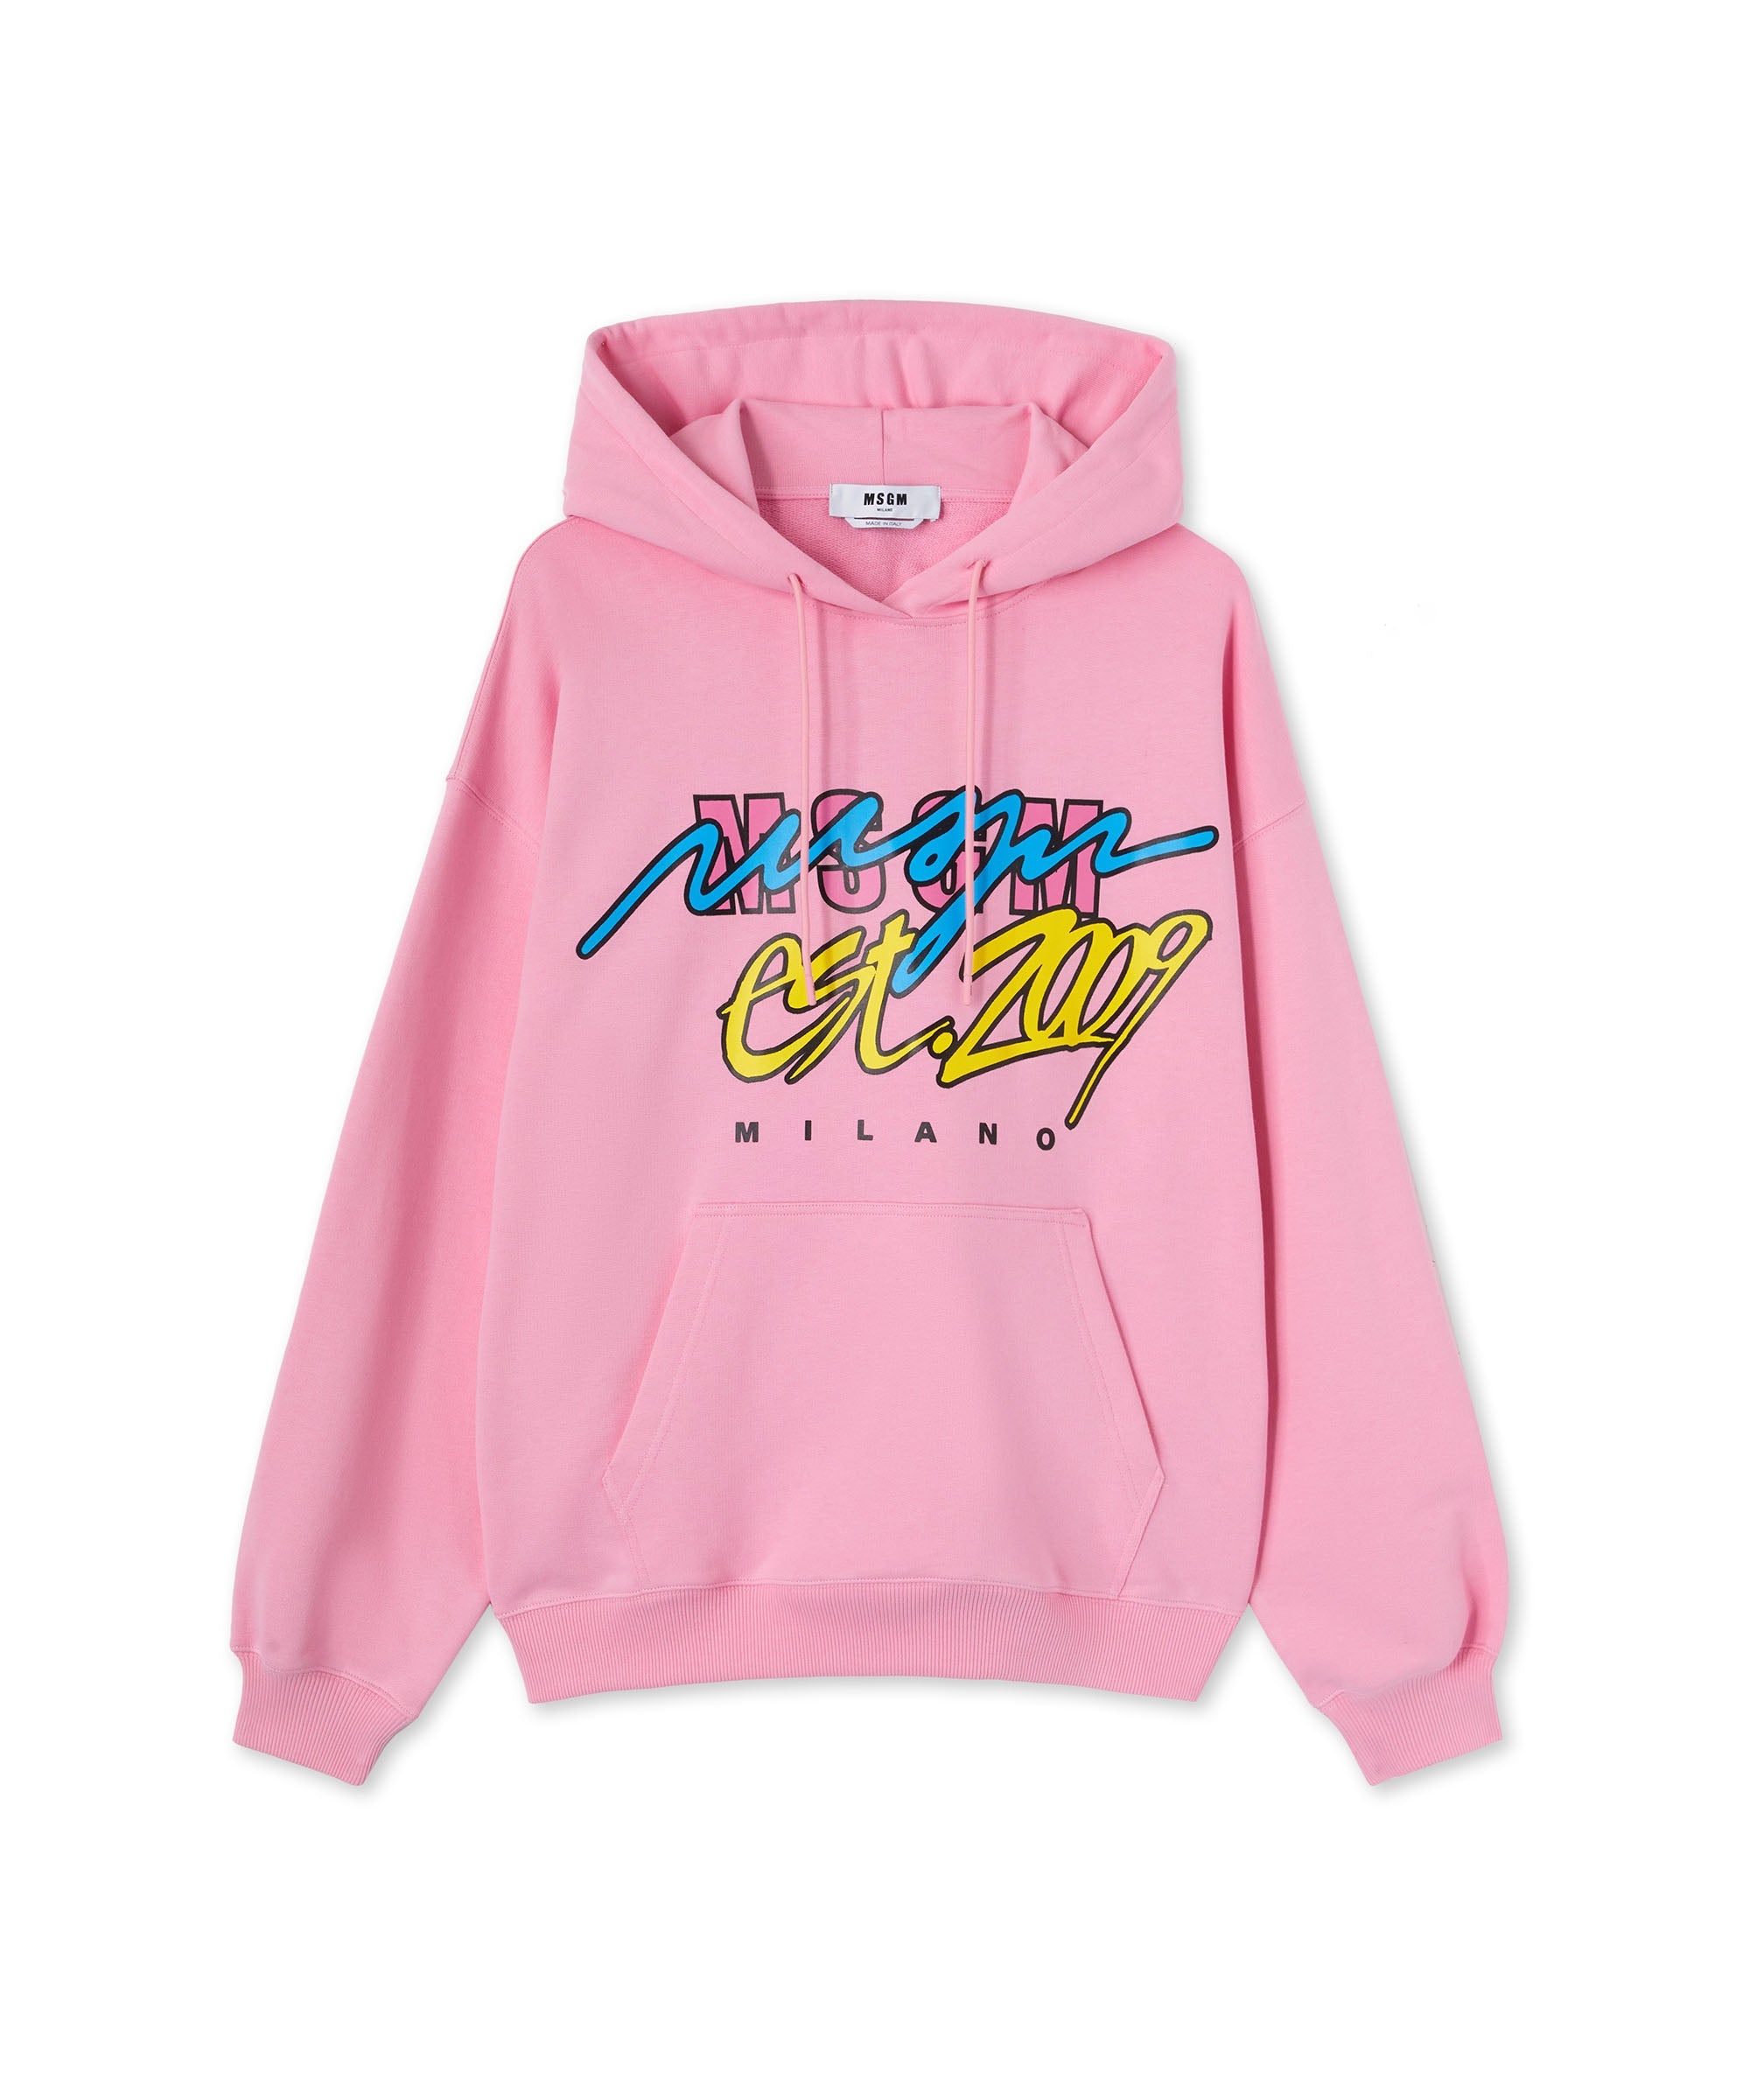 Hooded sweatshirt with "Street style" graphic - 1